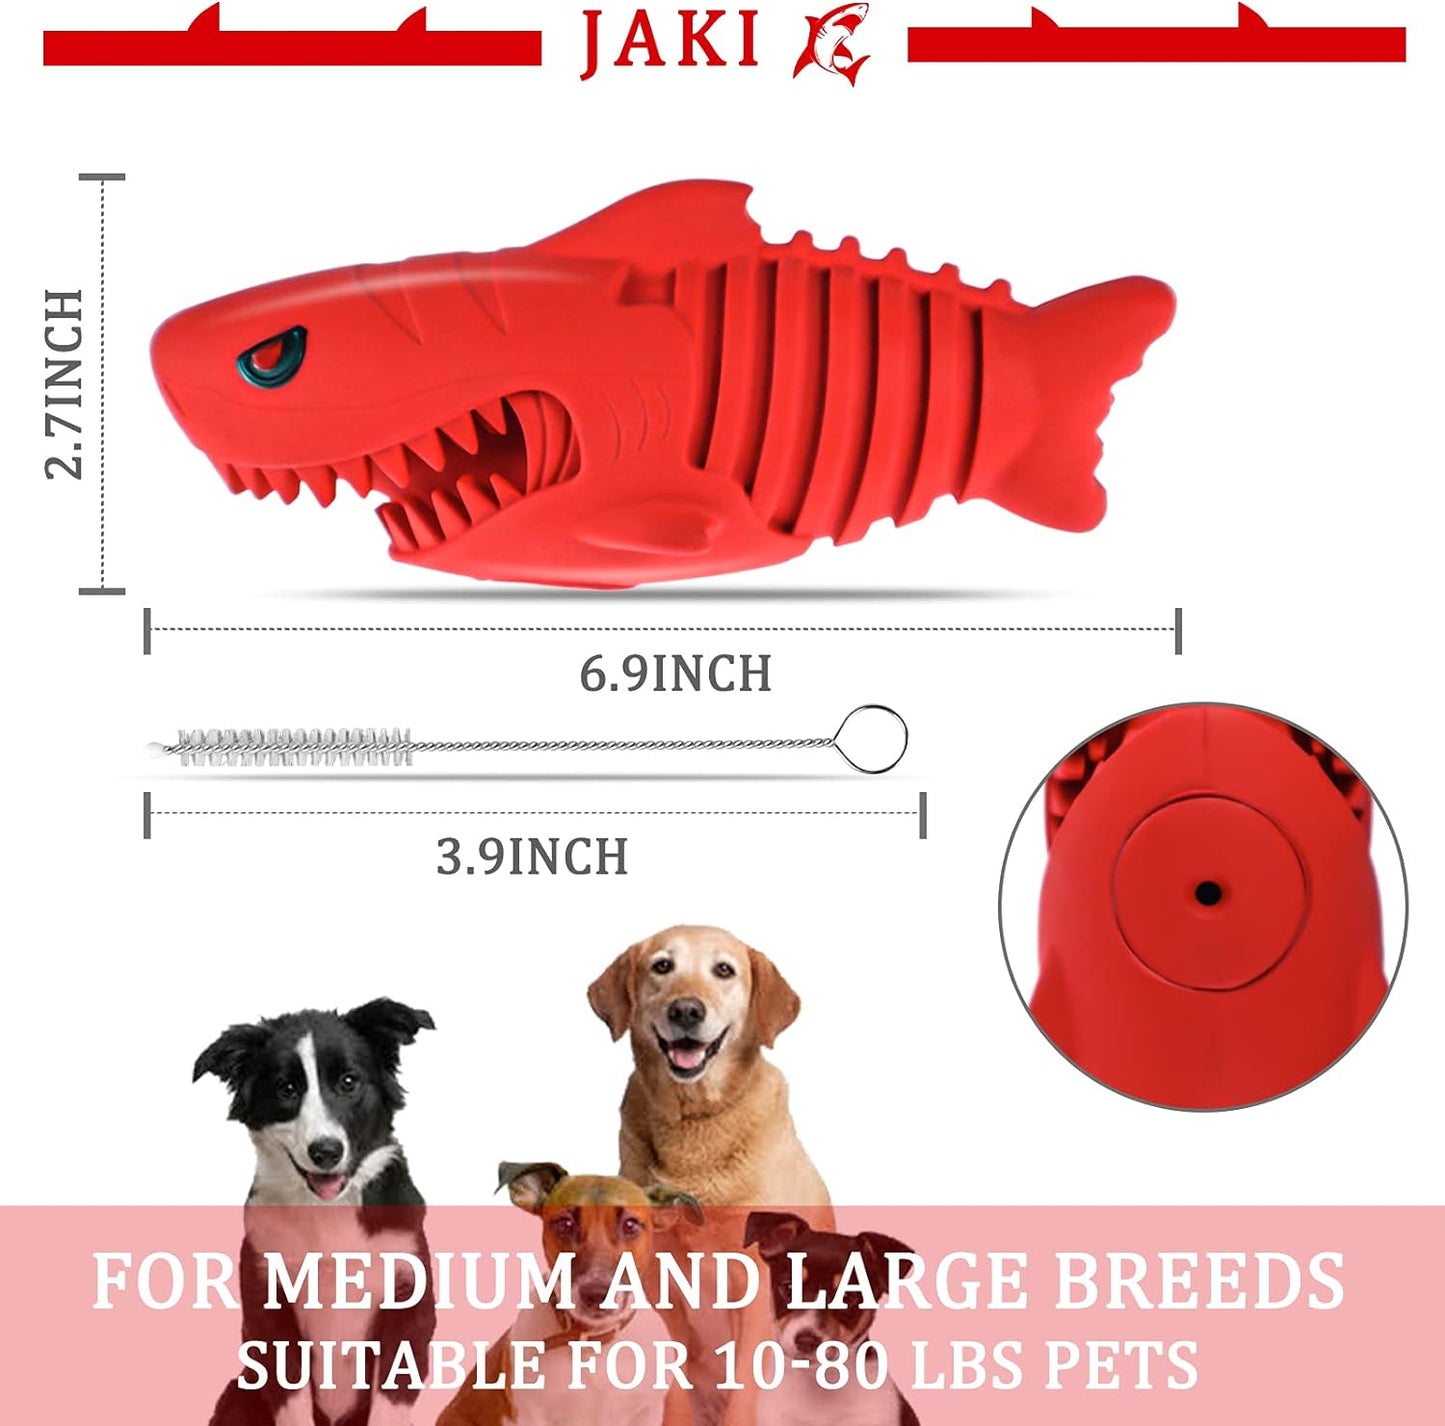 Milk Flavored Rubber Chew Toys for Dogs, (Color: Shark) Red